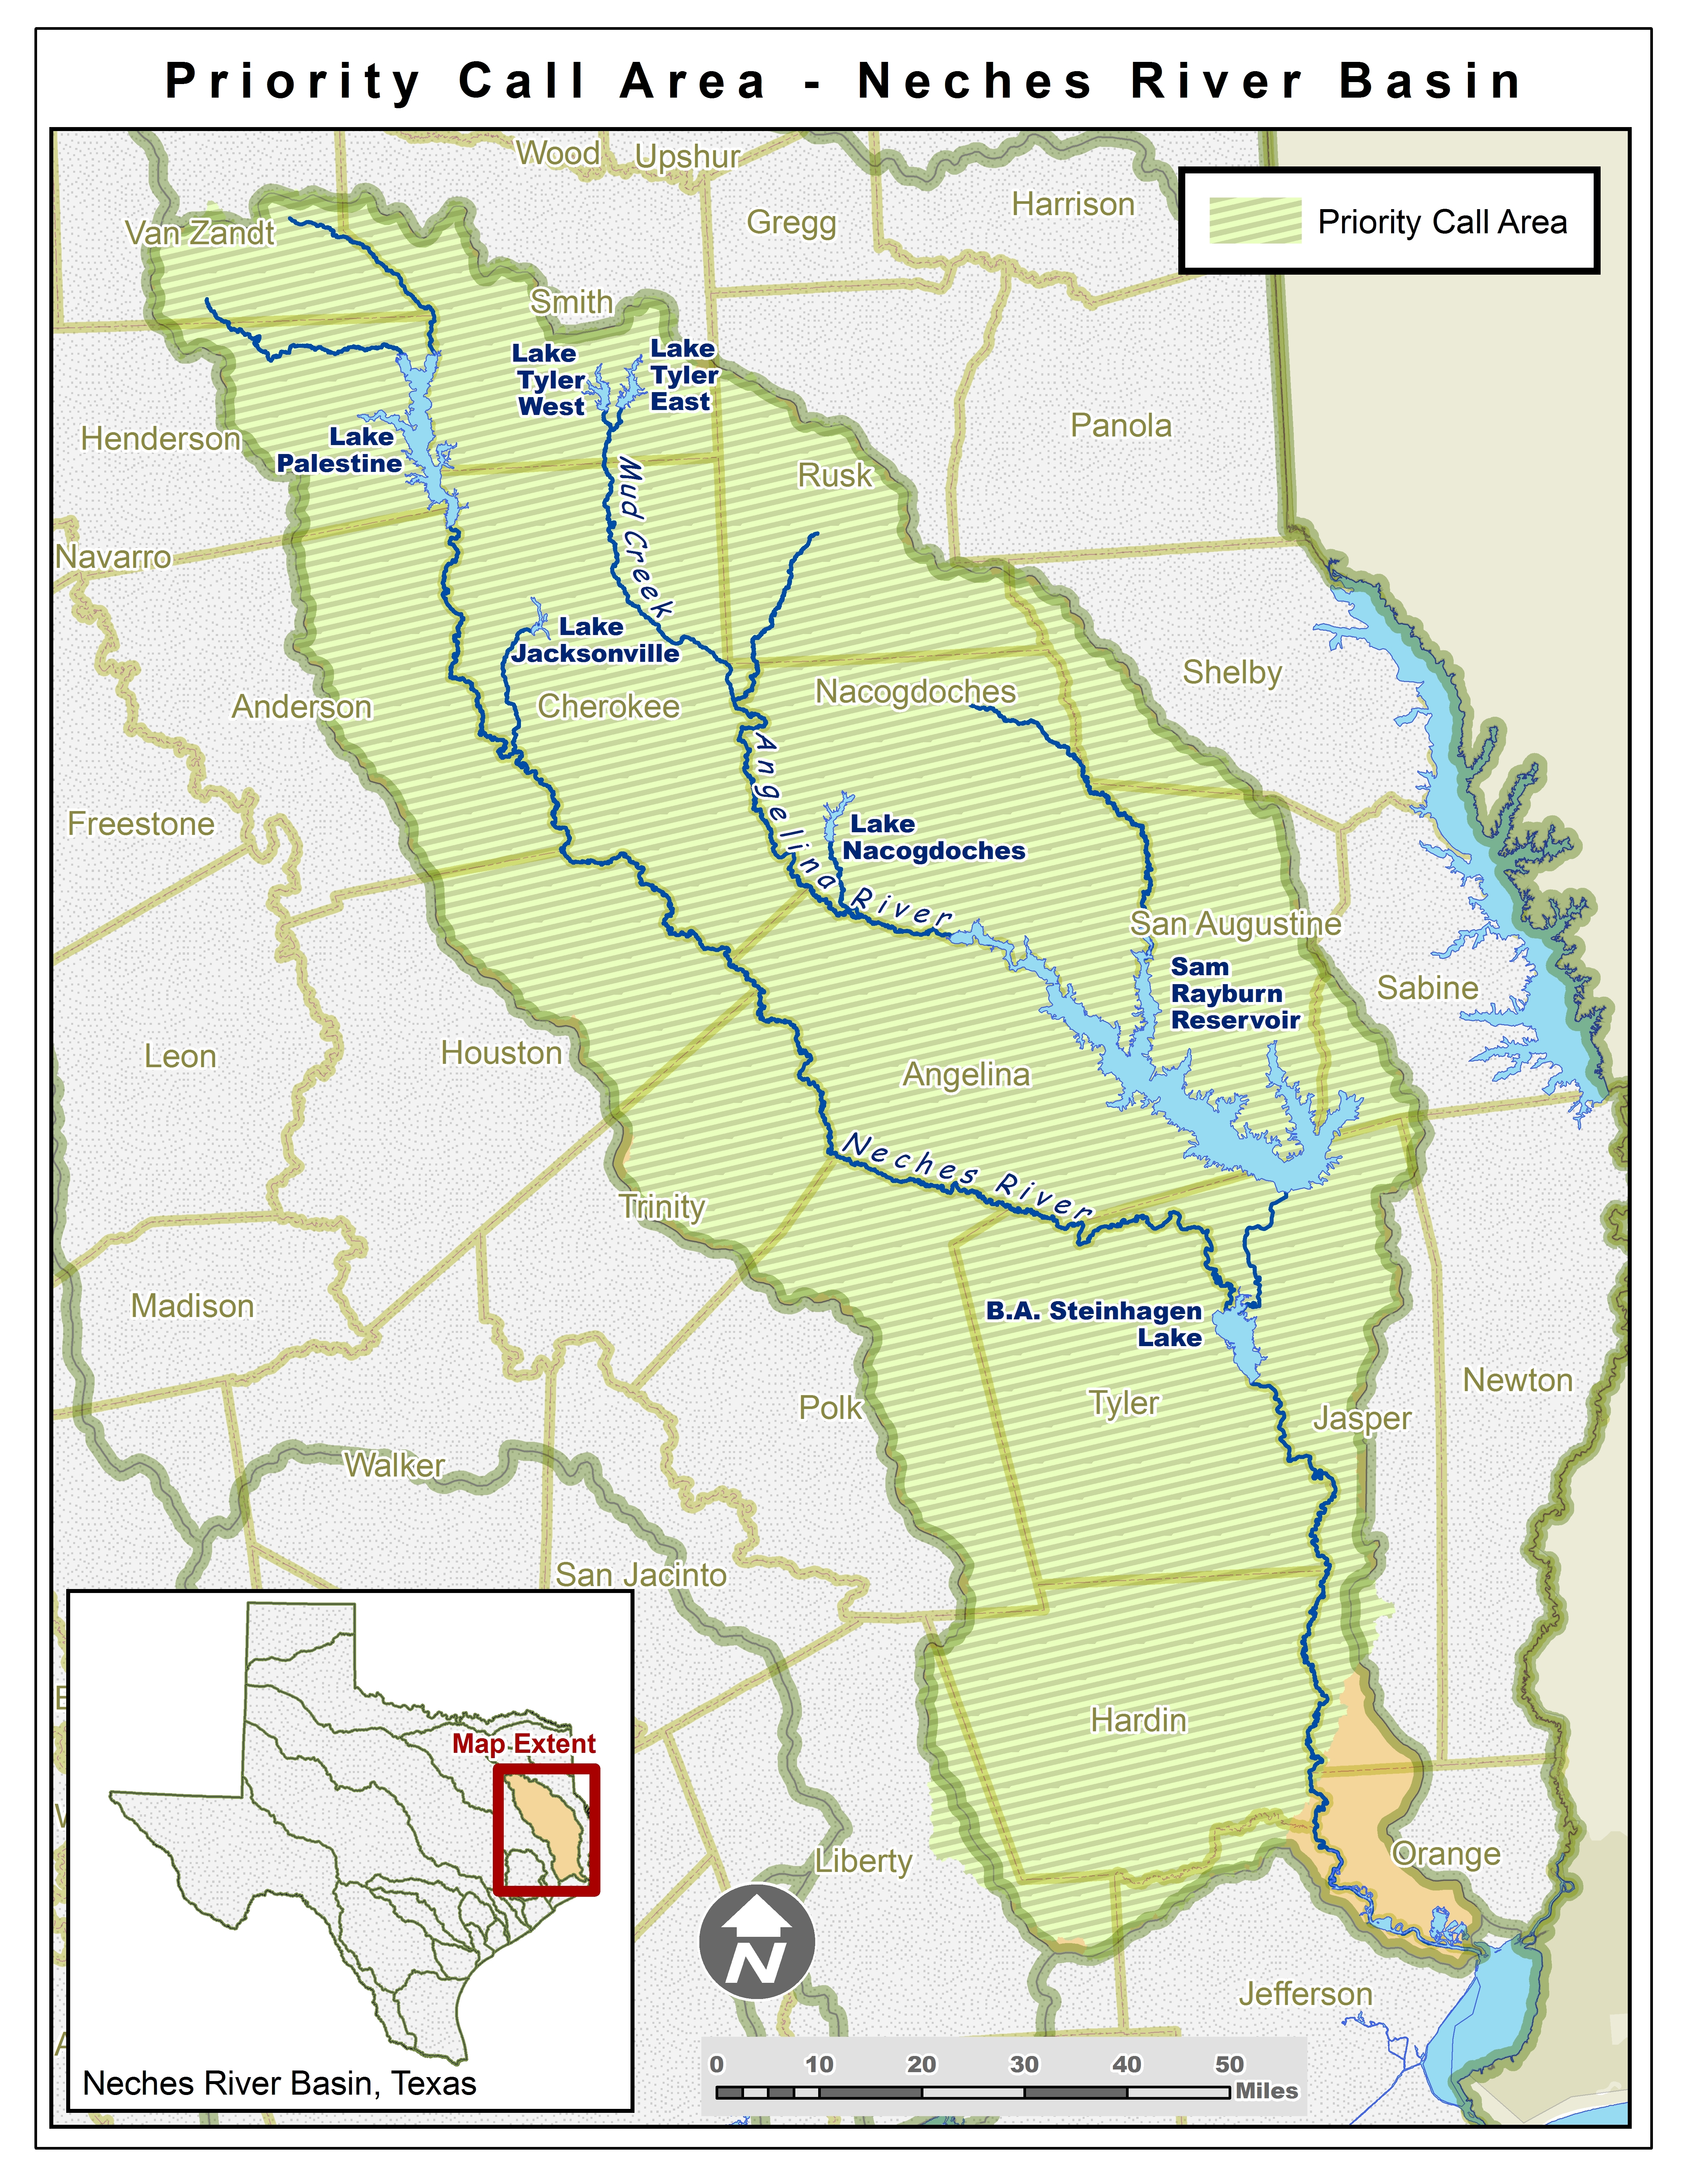 Map of the Neches River Priority Call Area